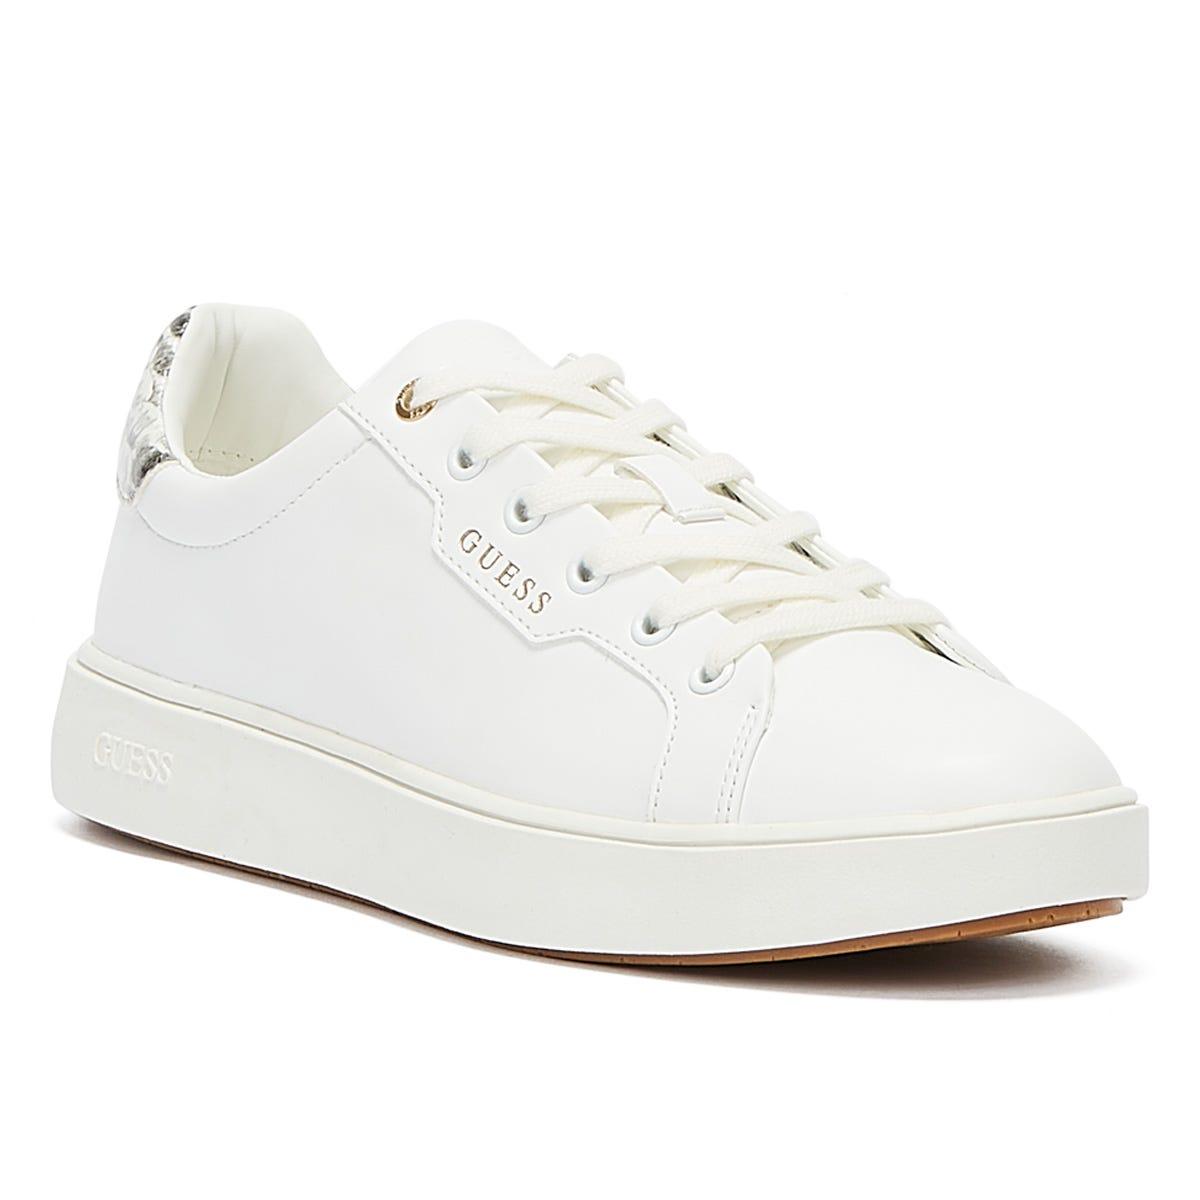 Guess Melanie Trainers in White | Lyst UK